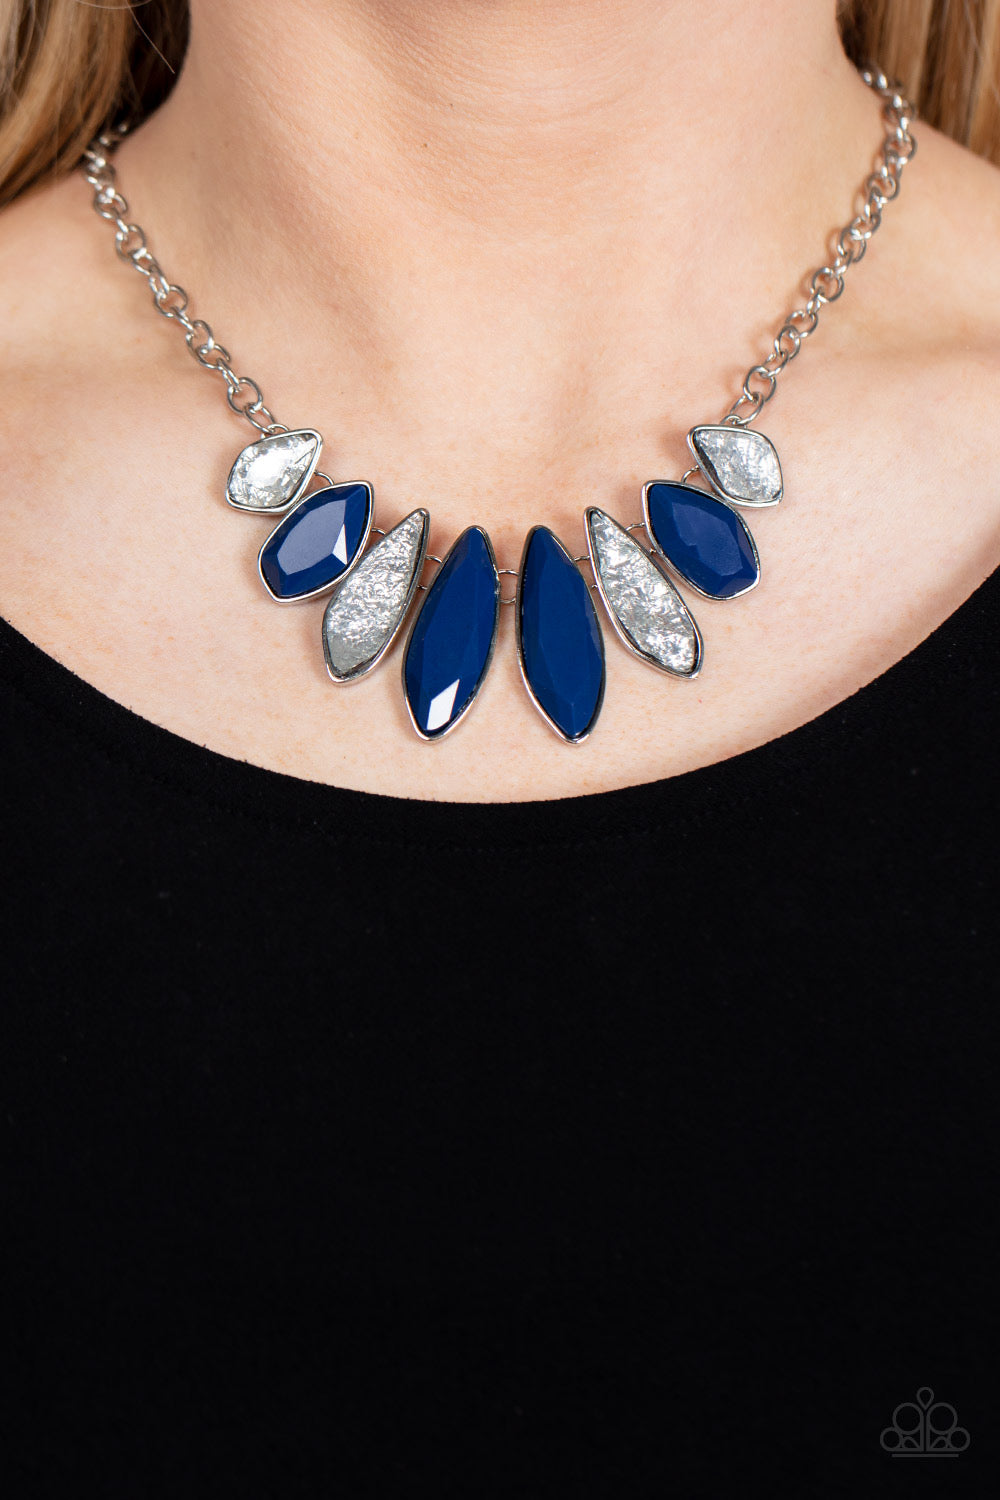 Paparazzi Crystallized Couture - Blue Necklace -Paparazzi Jewelry Images 